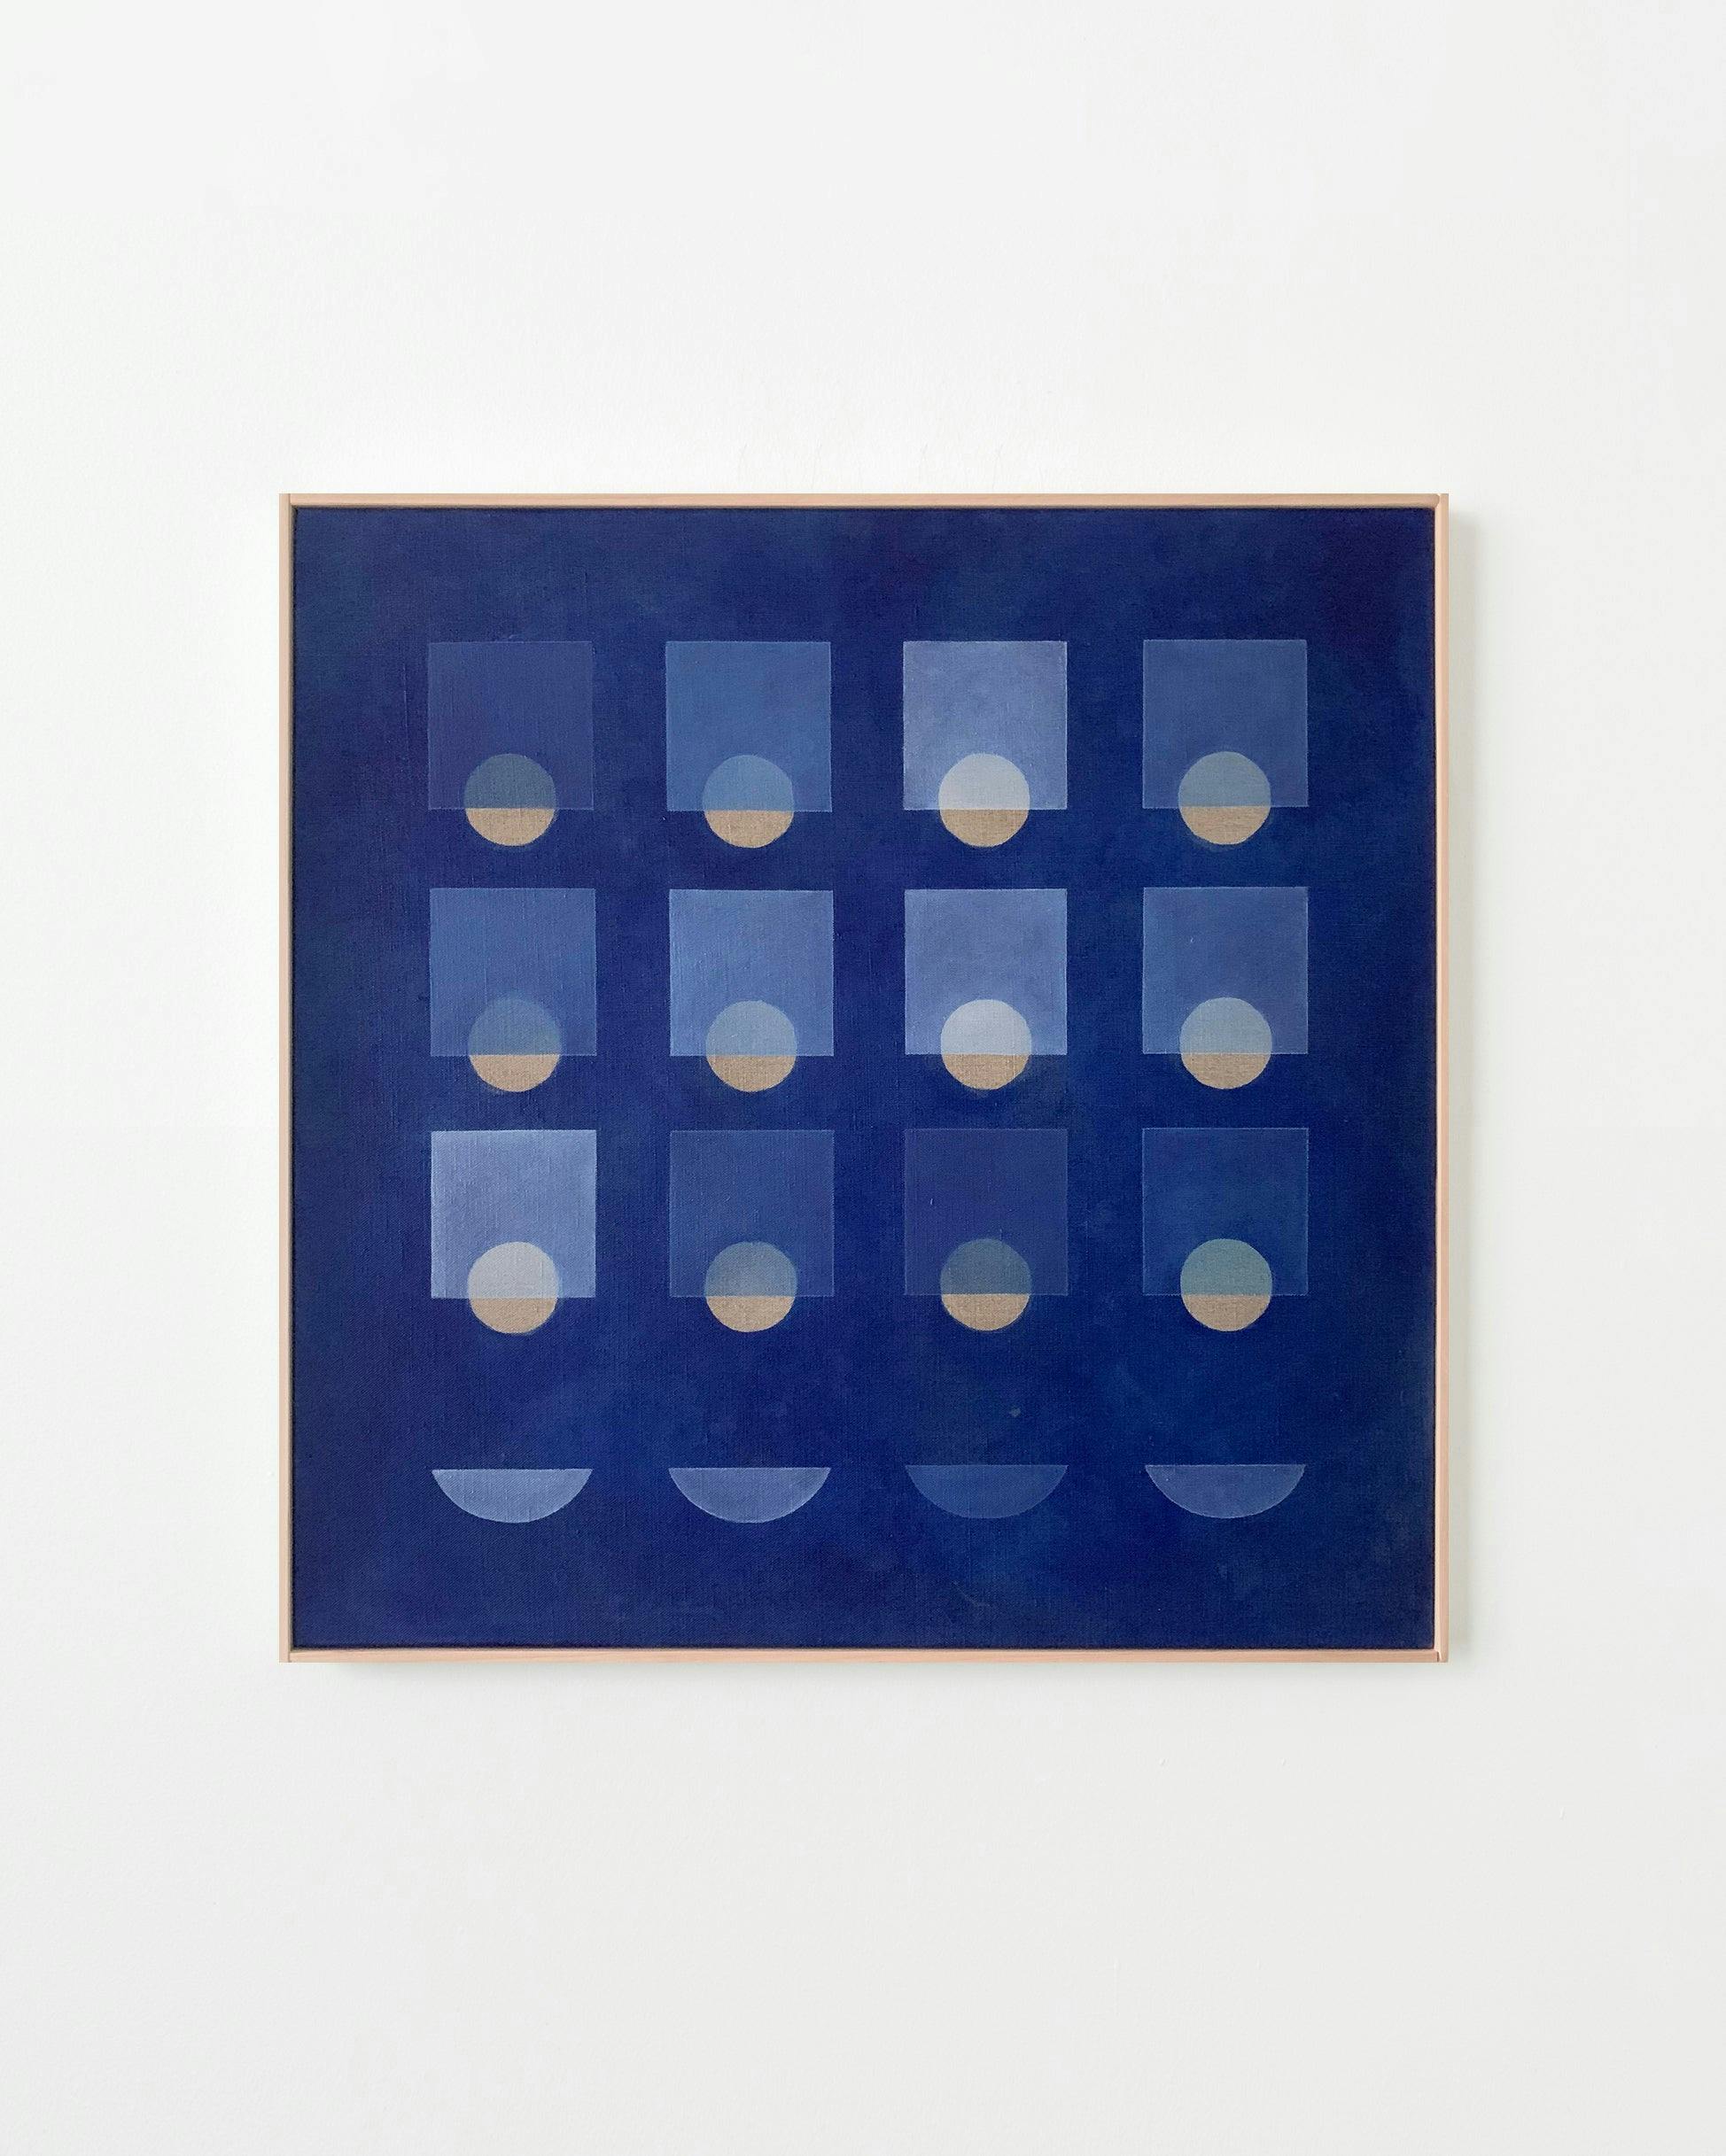 Painting by Carla Weeks titled "Winter Grid in French Ultramarine 3".